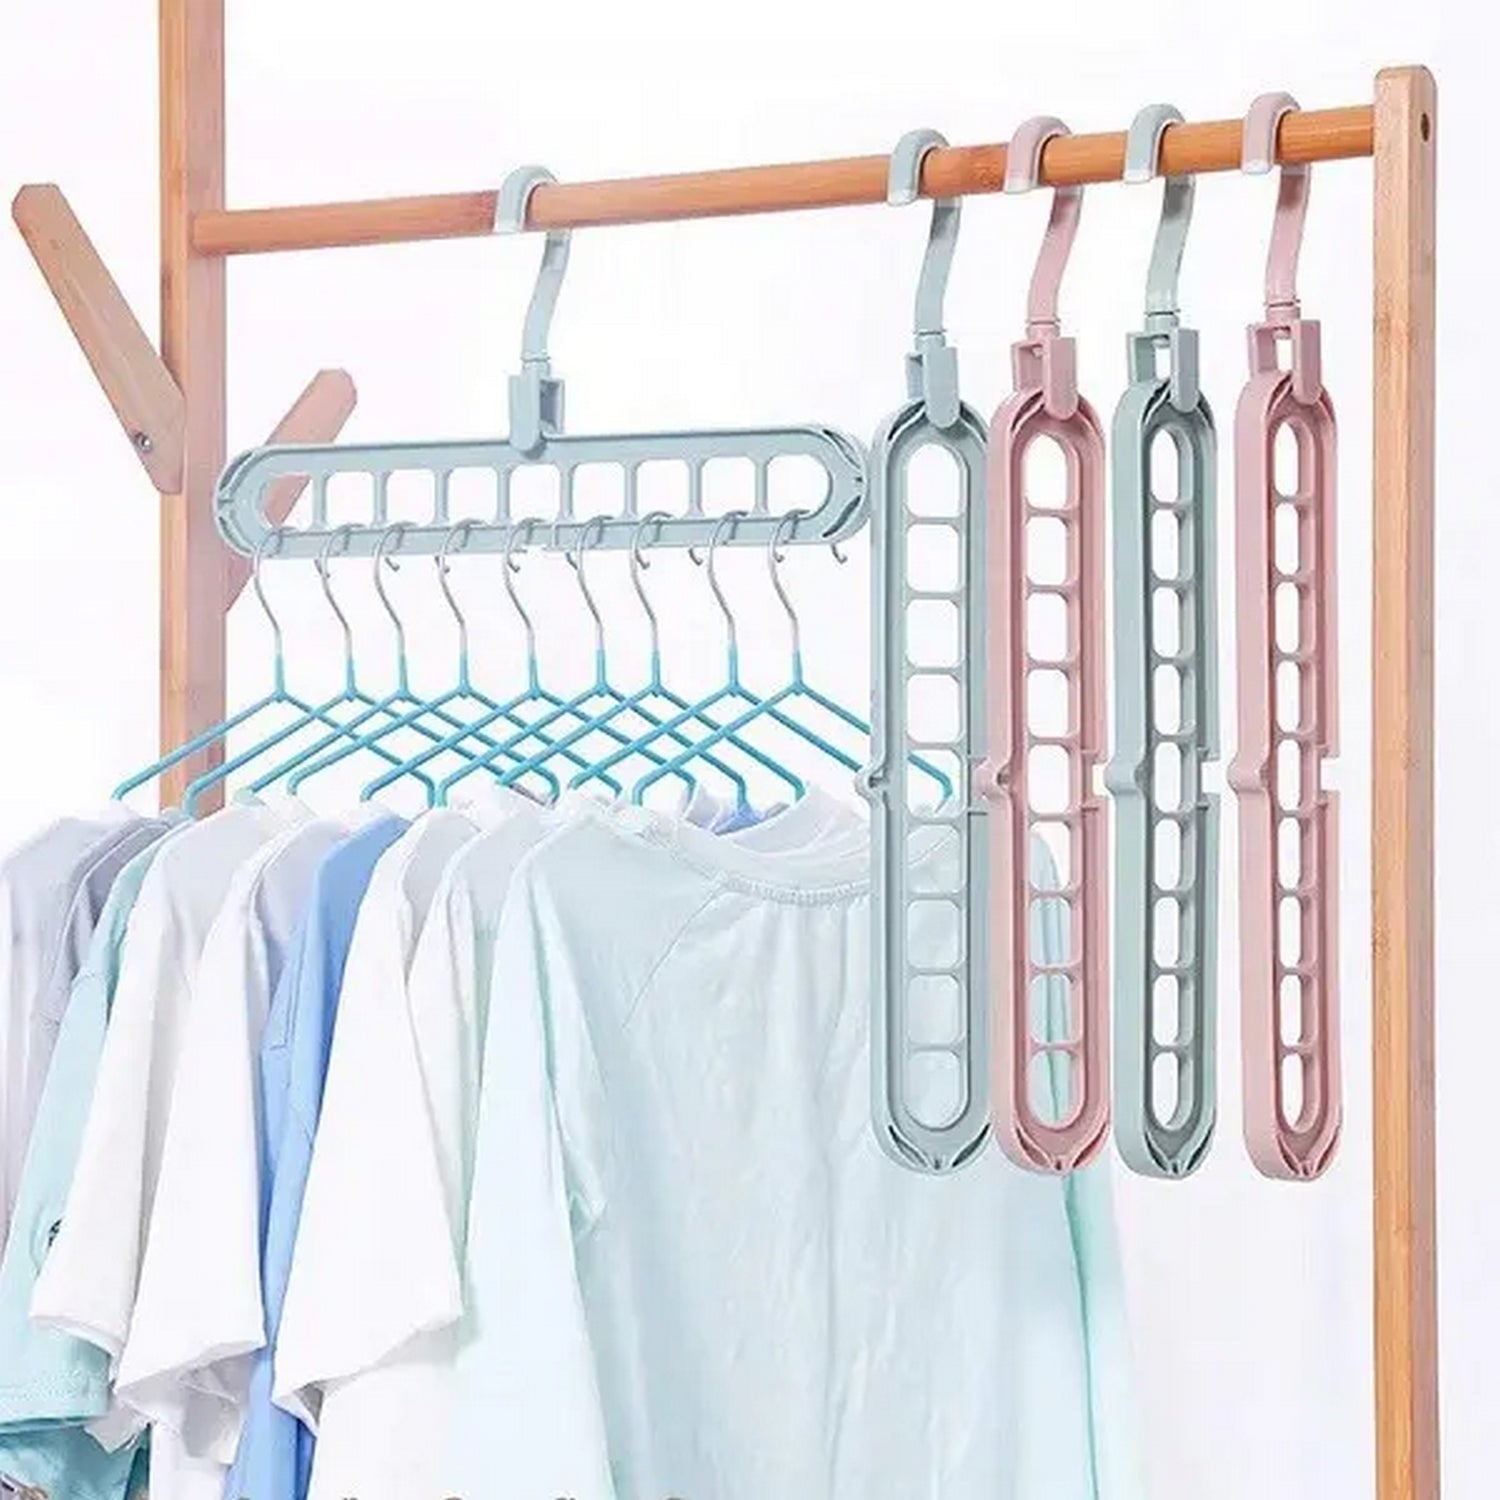 Magic Hangers 9 Holes Organizer Hangers For Clothes